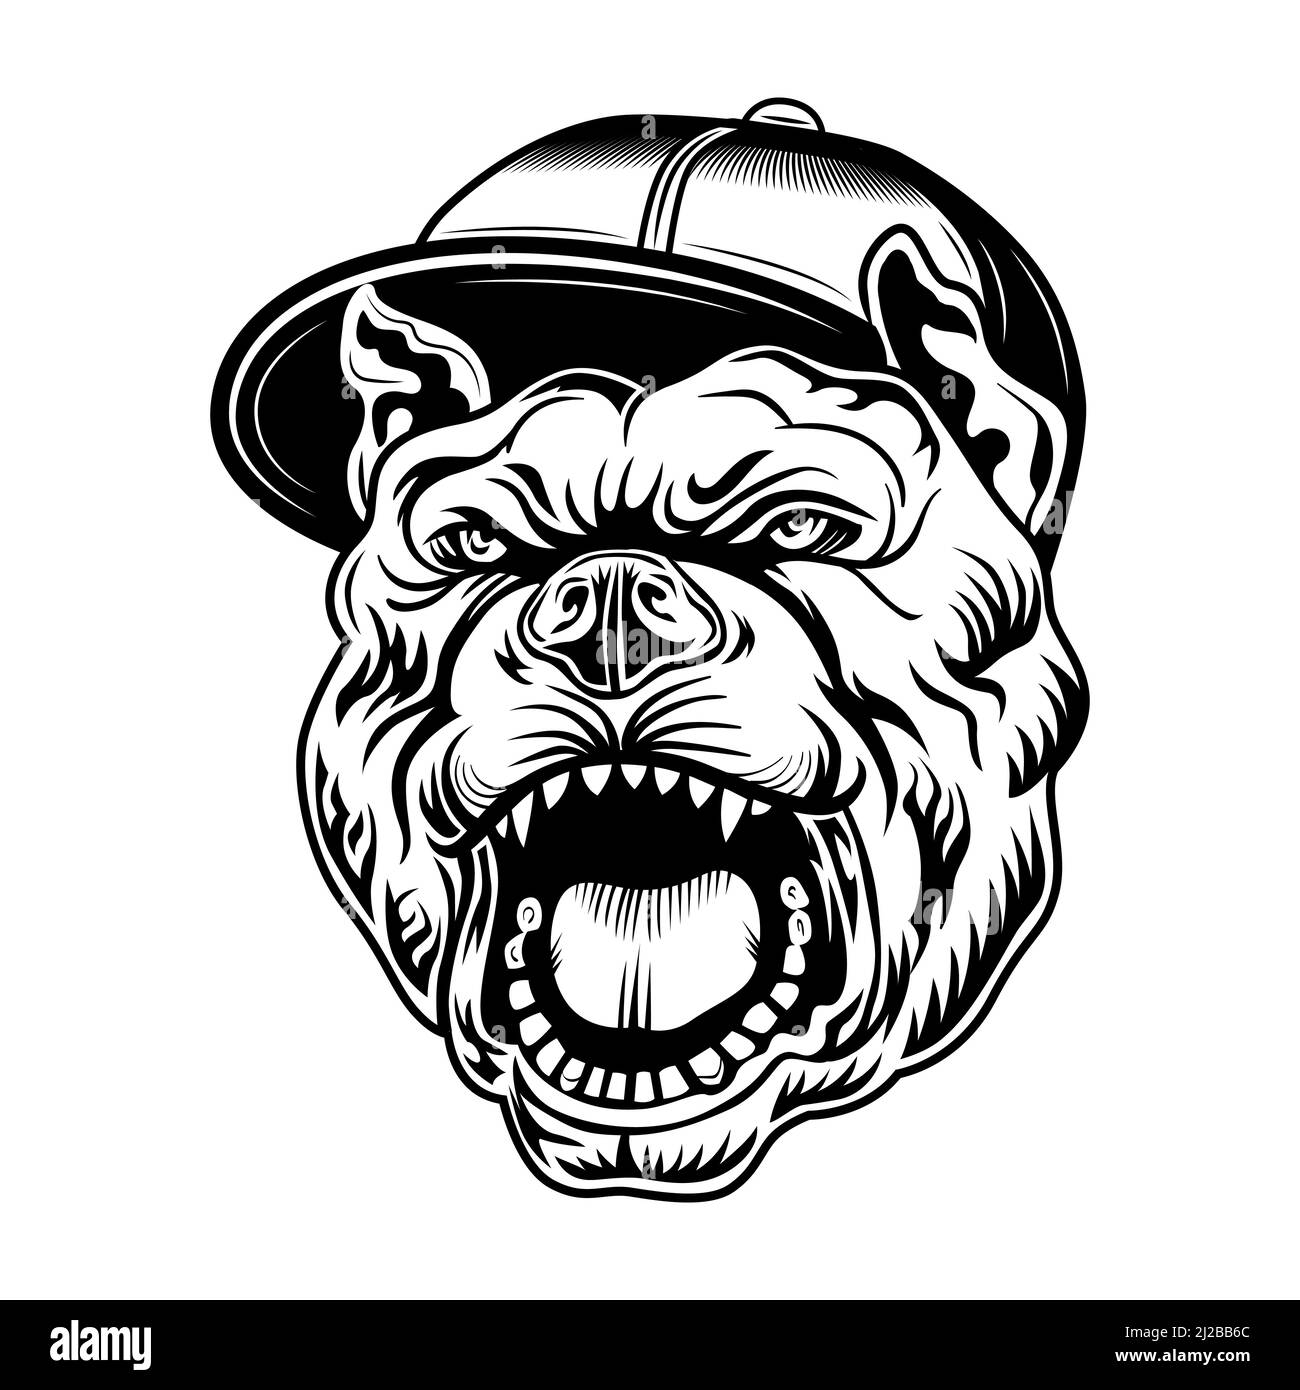 Gangsta bulldog vector illustration. Head of aggressive dog in gangsters cap. Lifestyle concept for tattoo templates, or rap music community emblems Stock Vector